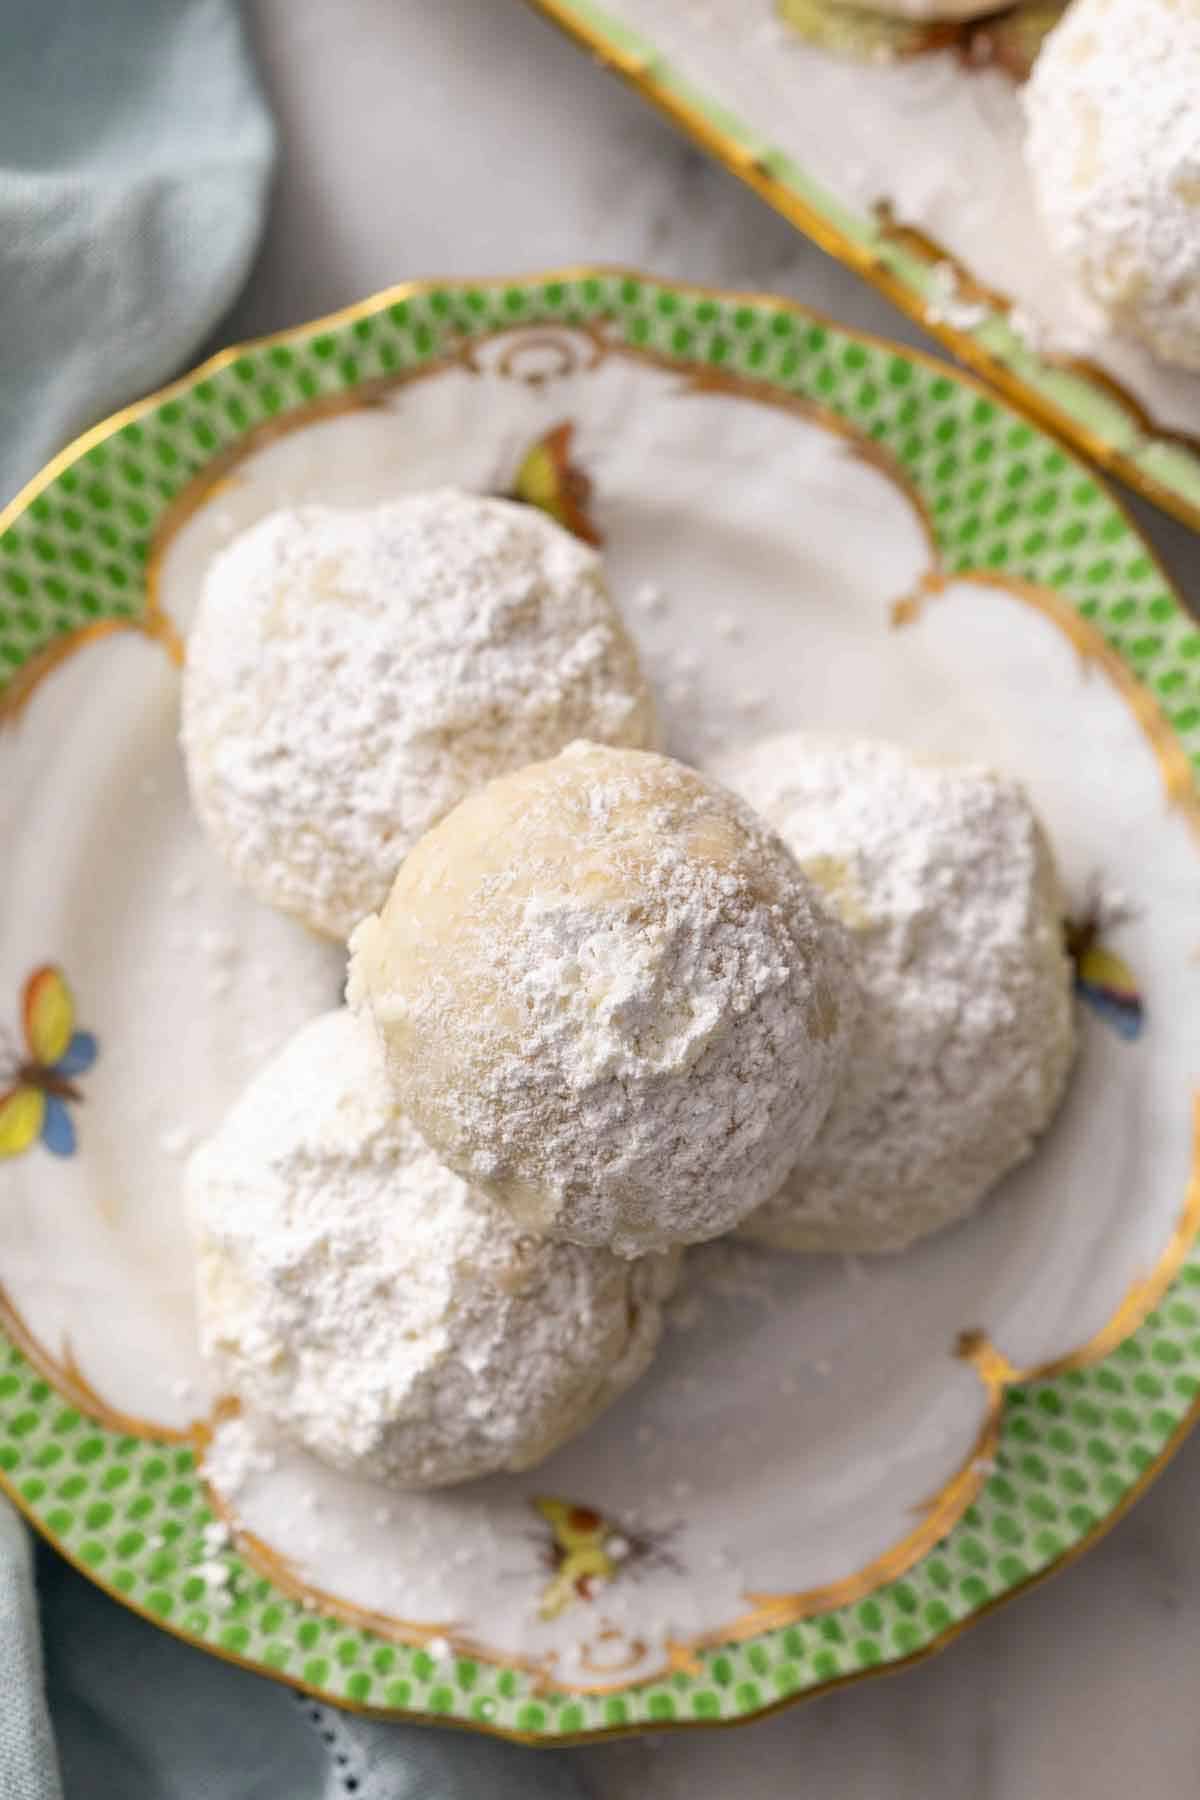 Overhead view of a small pile of Mexican wedding cookies on a small plate.